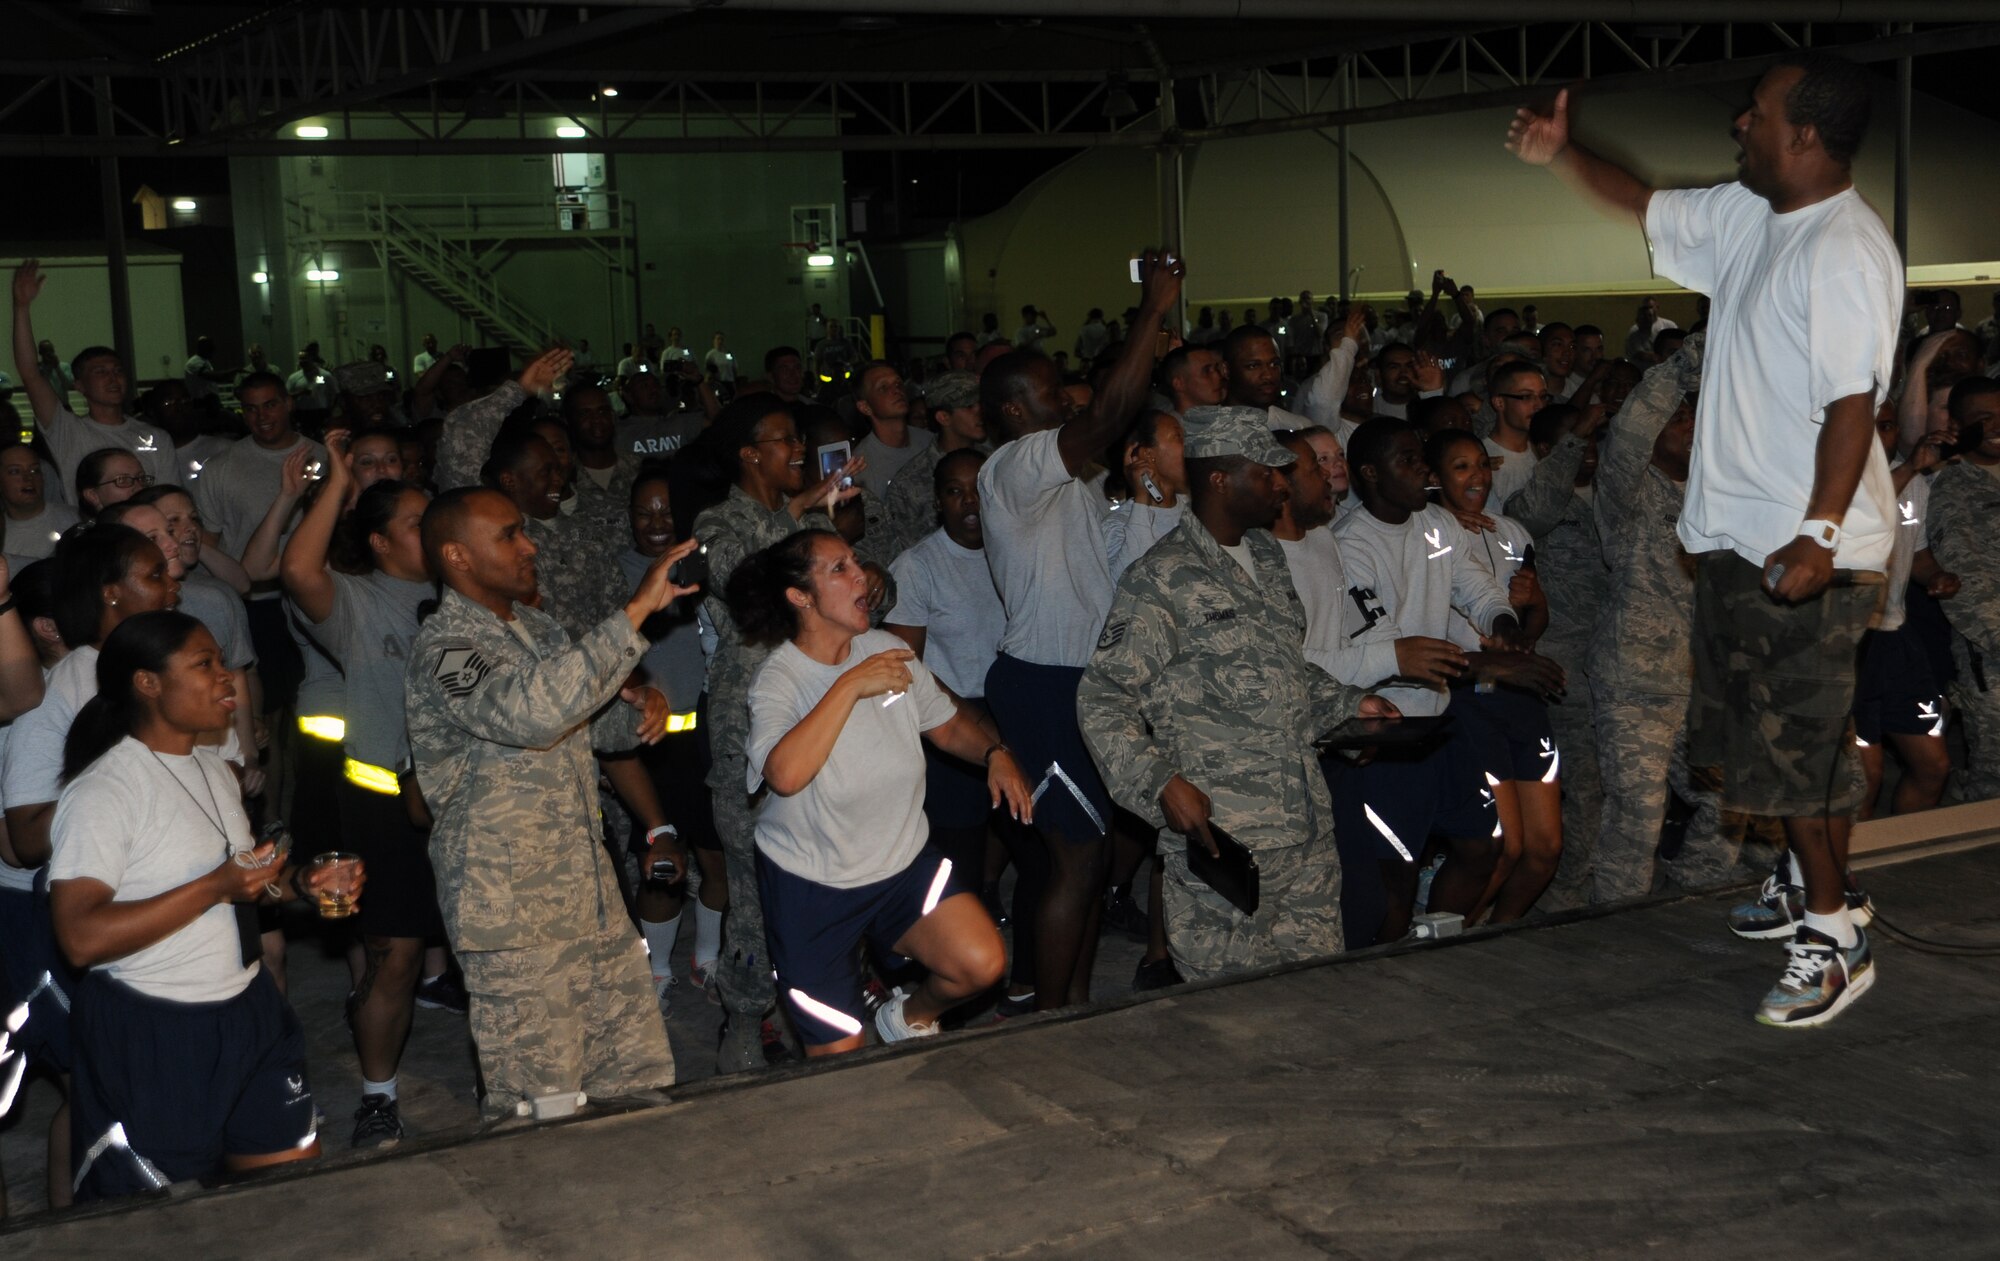 SOUTHWEST ASIA - Members of the 380th Air Expeditionary Wing dance while famed entertainer DJ Jazzy Jeff?s emcee, Skillz (right), pumps up the crowd April 25, 2012. This was first time DJ Jazzy Jeff performed for military members and after playing for more than an hour, he and his emcee took pictures and signed autographs. (U.S. Air Force photo/Staff Sgt. J.G. Buzanowski)